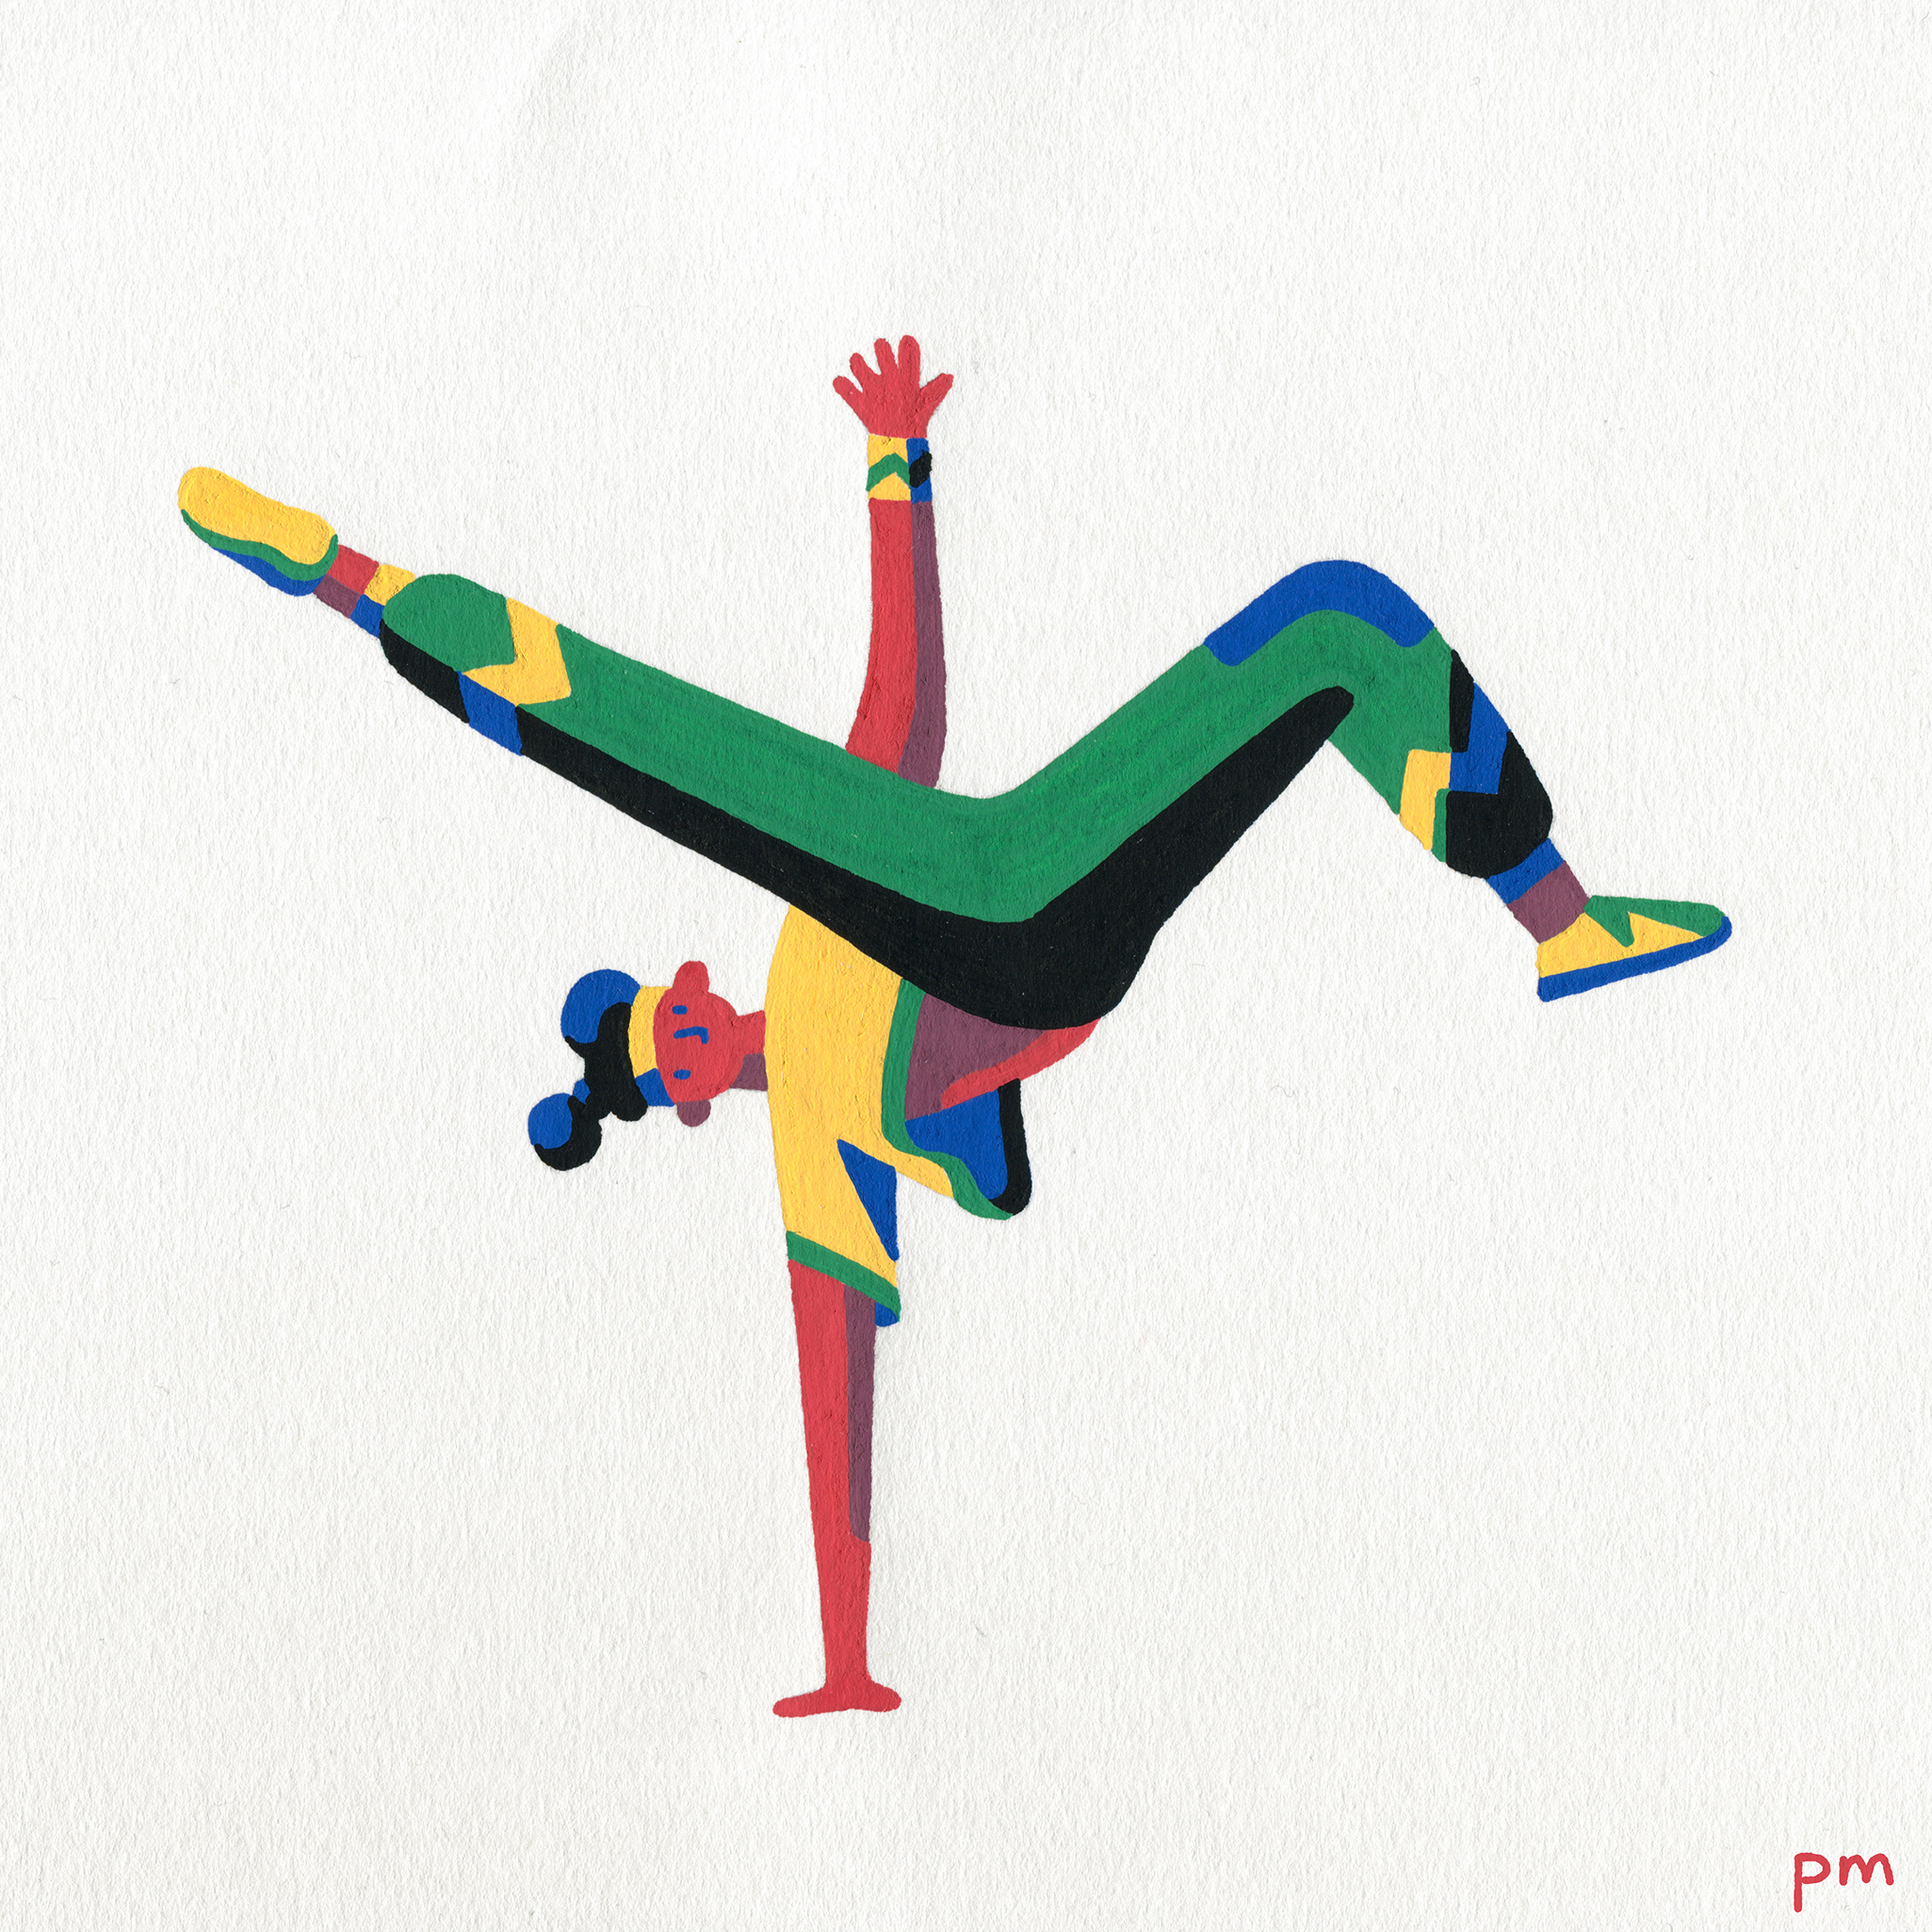 An illustration painting of a breakdancer dancing, hand drawn with colourful posca markers